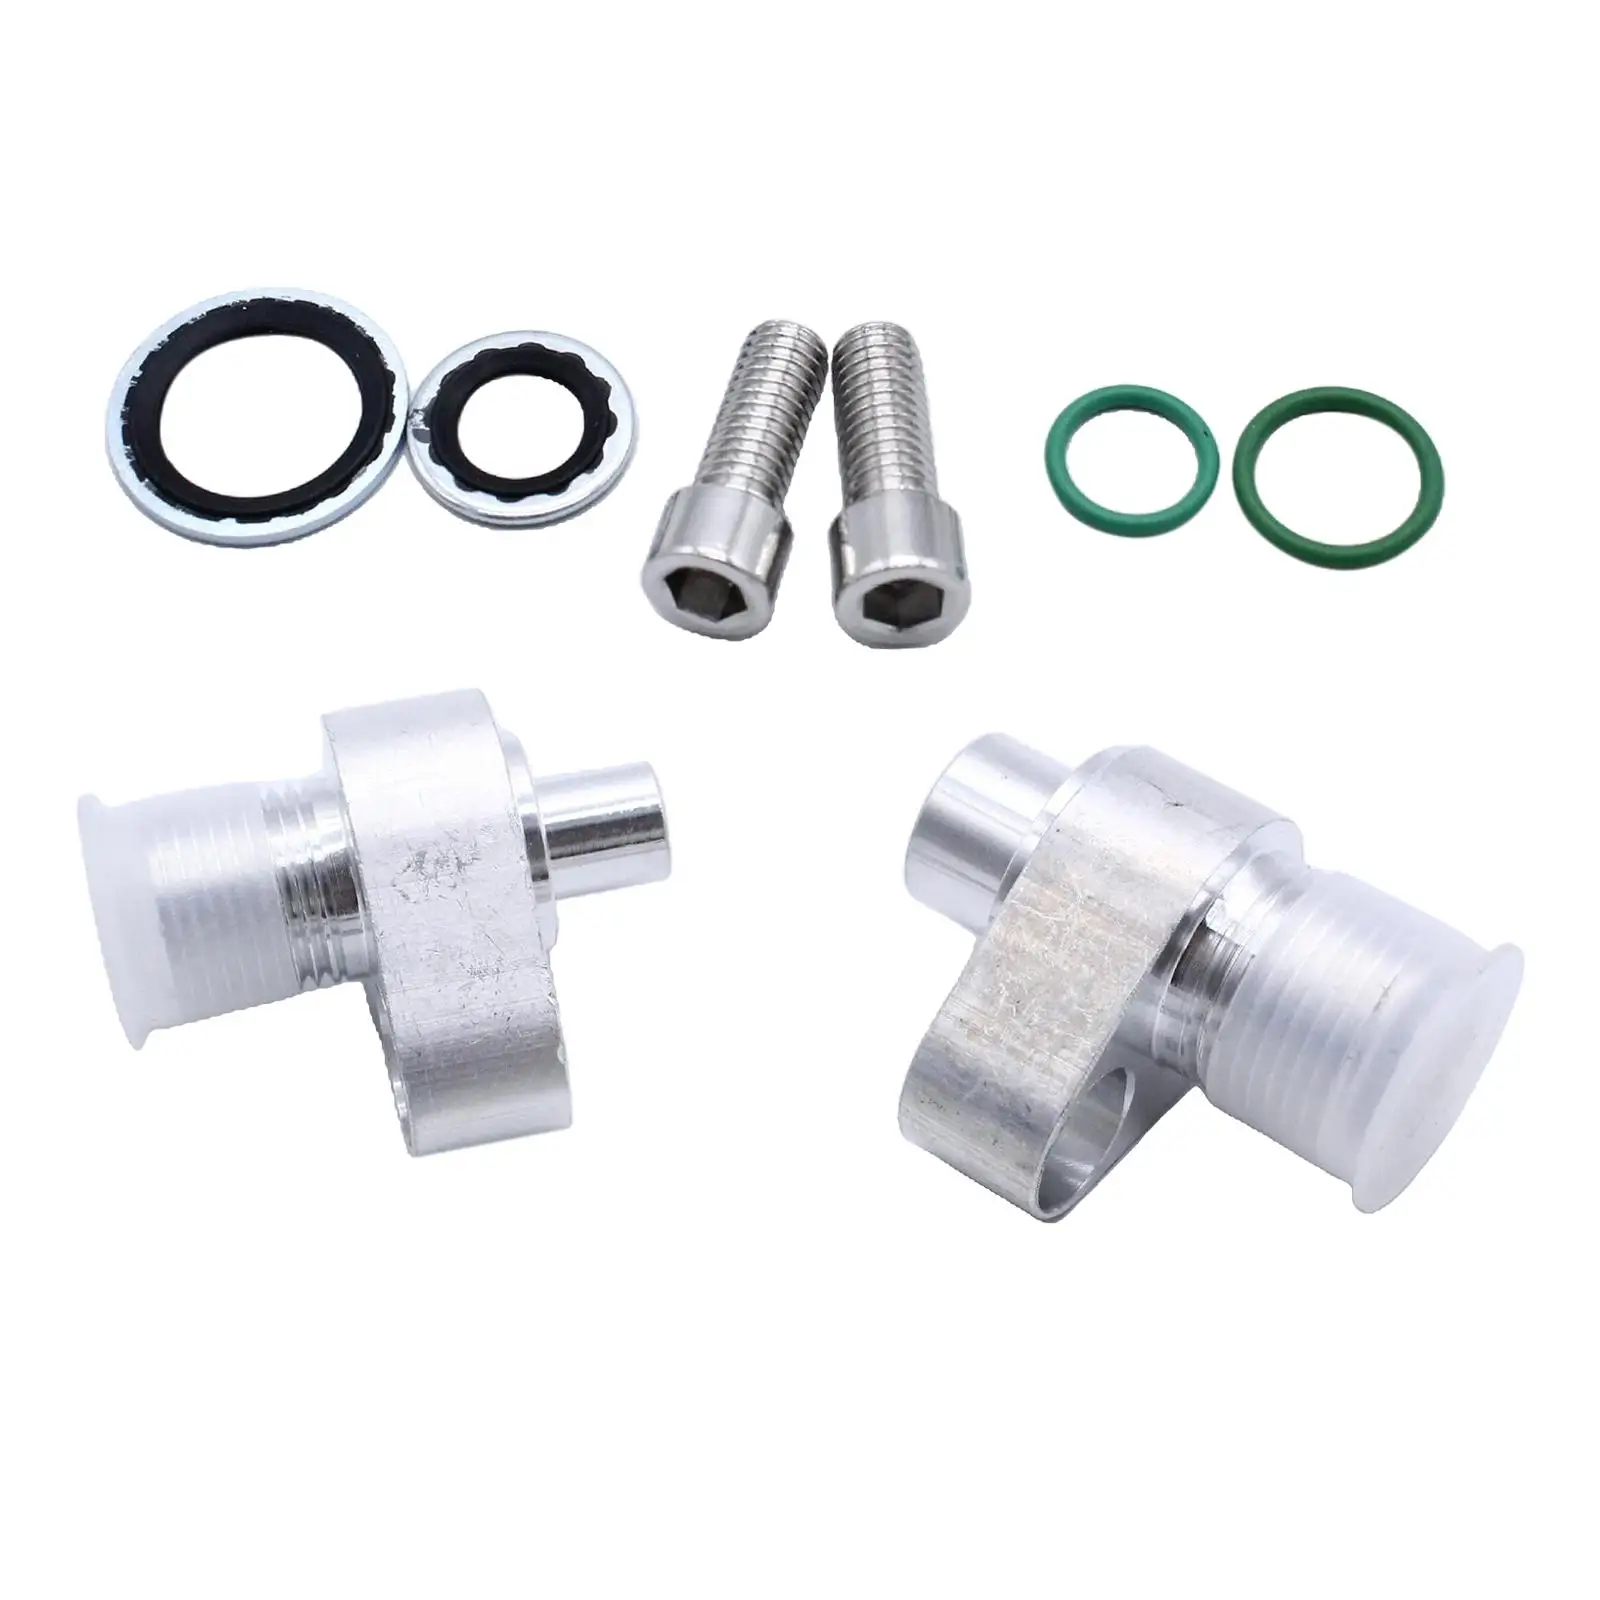 451-1105 cessories  Compressor Connector Adapter Fittings Fit for